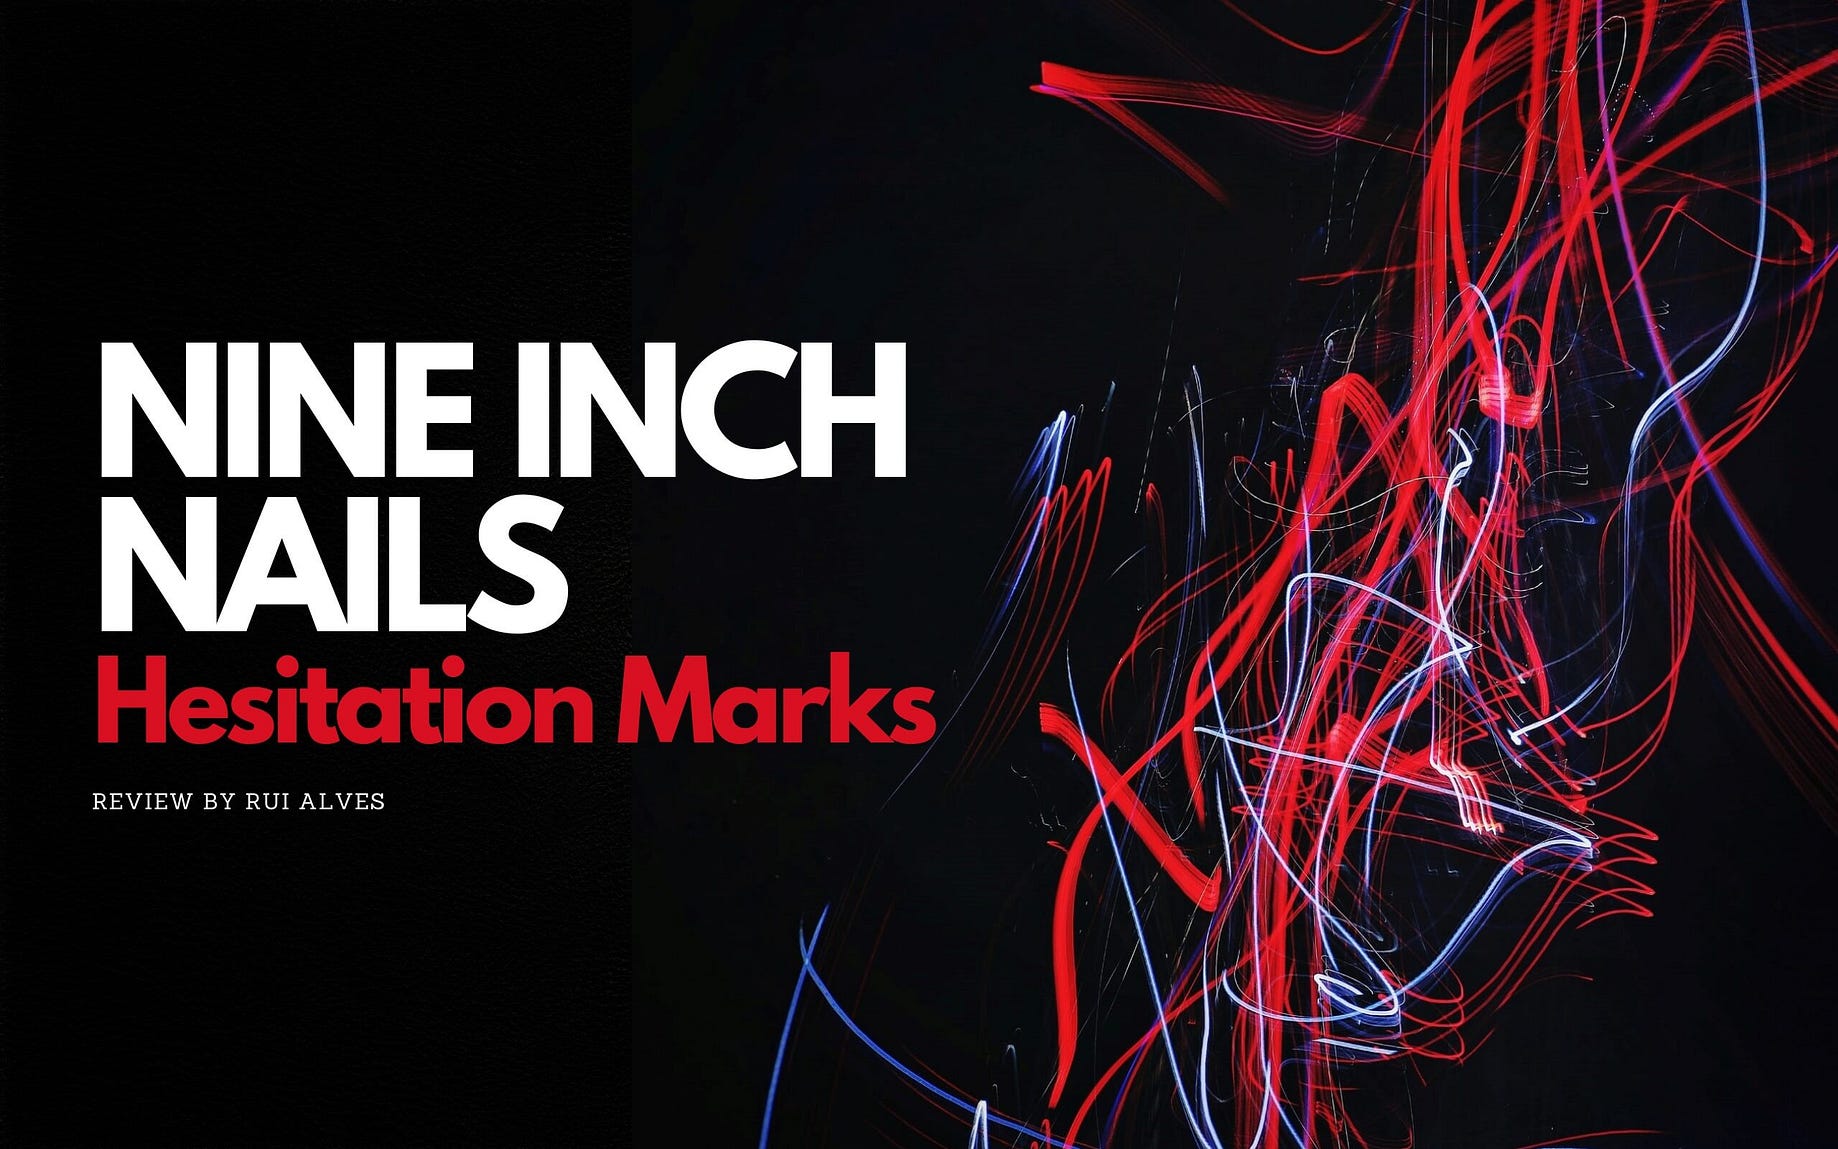 Album Review: Hesitation Marks by Nine Inch Nails | by Rui Alves | Rock  n'Heavy